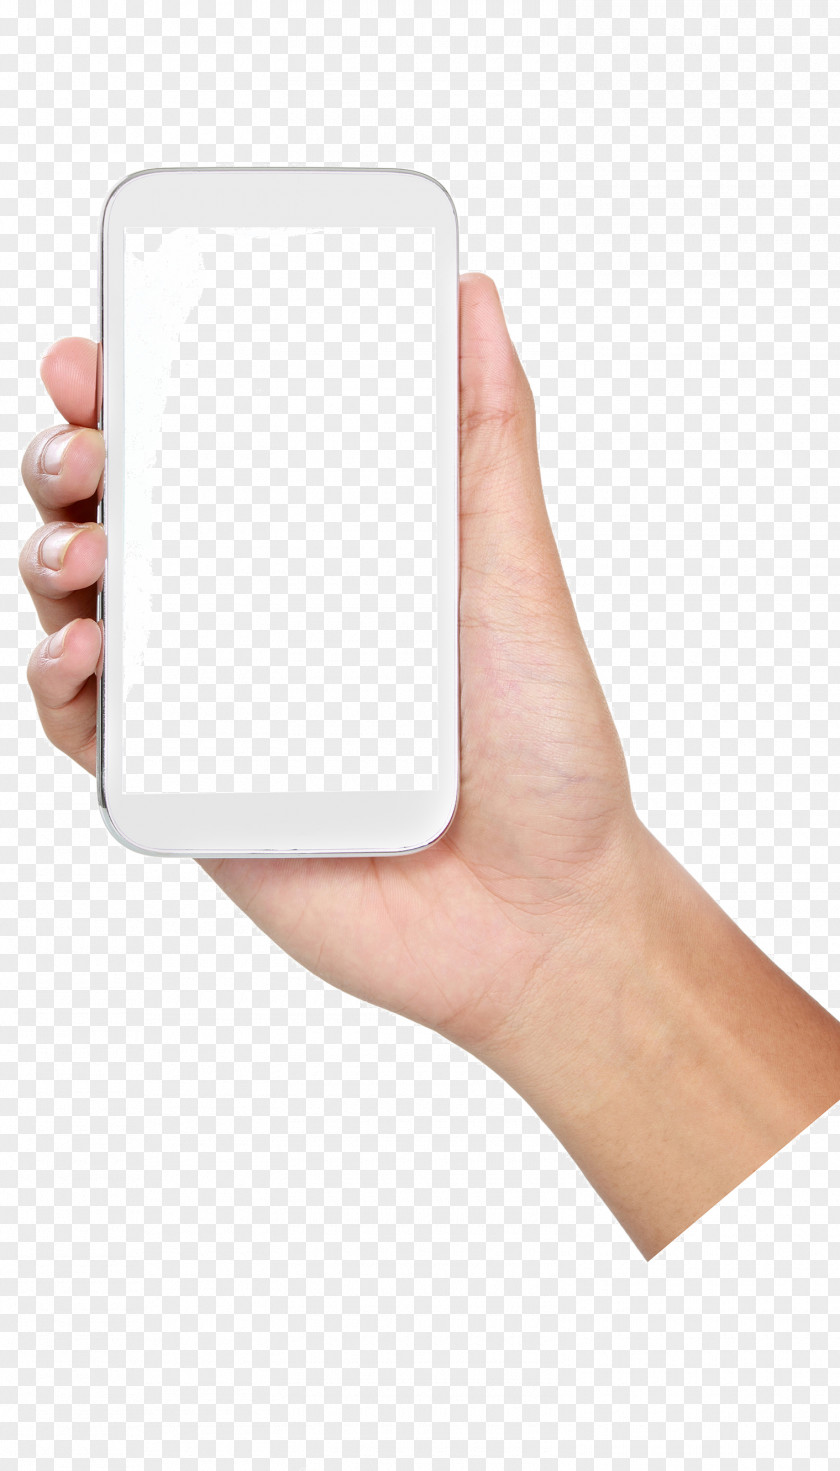 Holding A Cell Phone Gesture Android Application Package Mobile App Download PNG